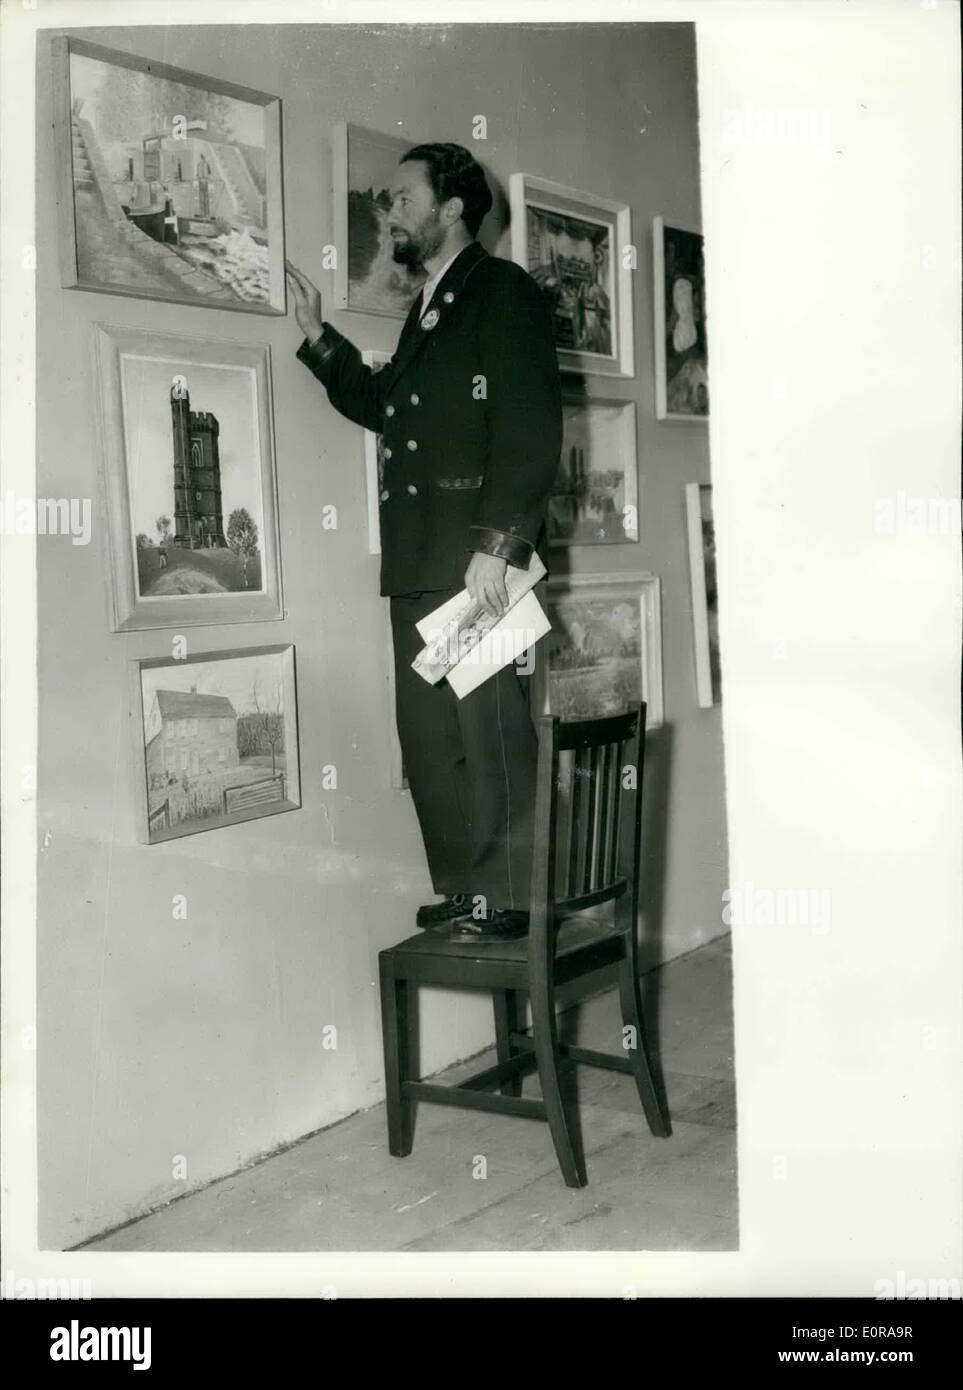 Nov. 11, 1958 - Annual exhibition of London Transport art group. No ''Standing Embargo'' here. Photo shows Mr. L.J. Hind a bus driver from West Drayton stands on a chair to view his painting ''Into the Locks'' at the Anuual Exhibition of the London Transport Art Group at Charing Cross Underground Station this morning. Stock Photo